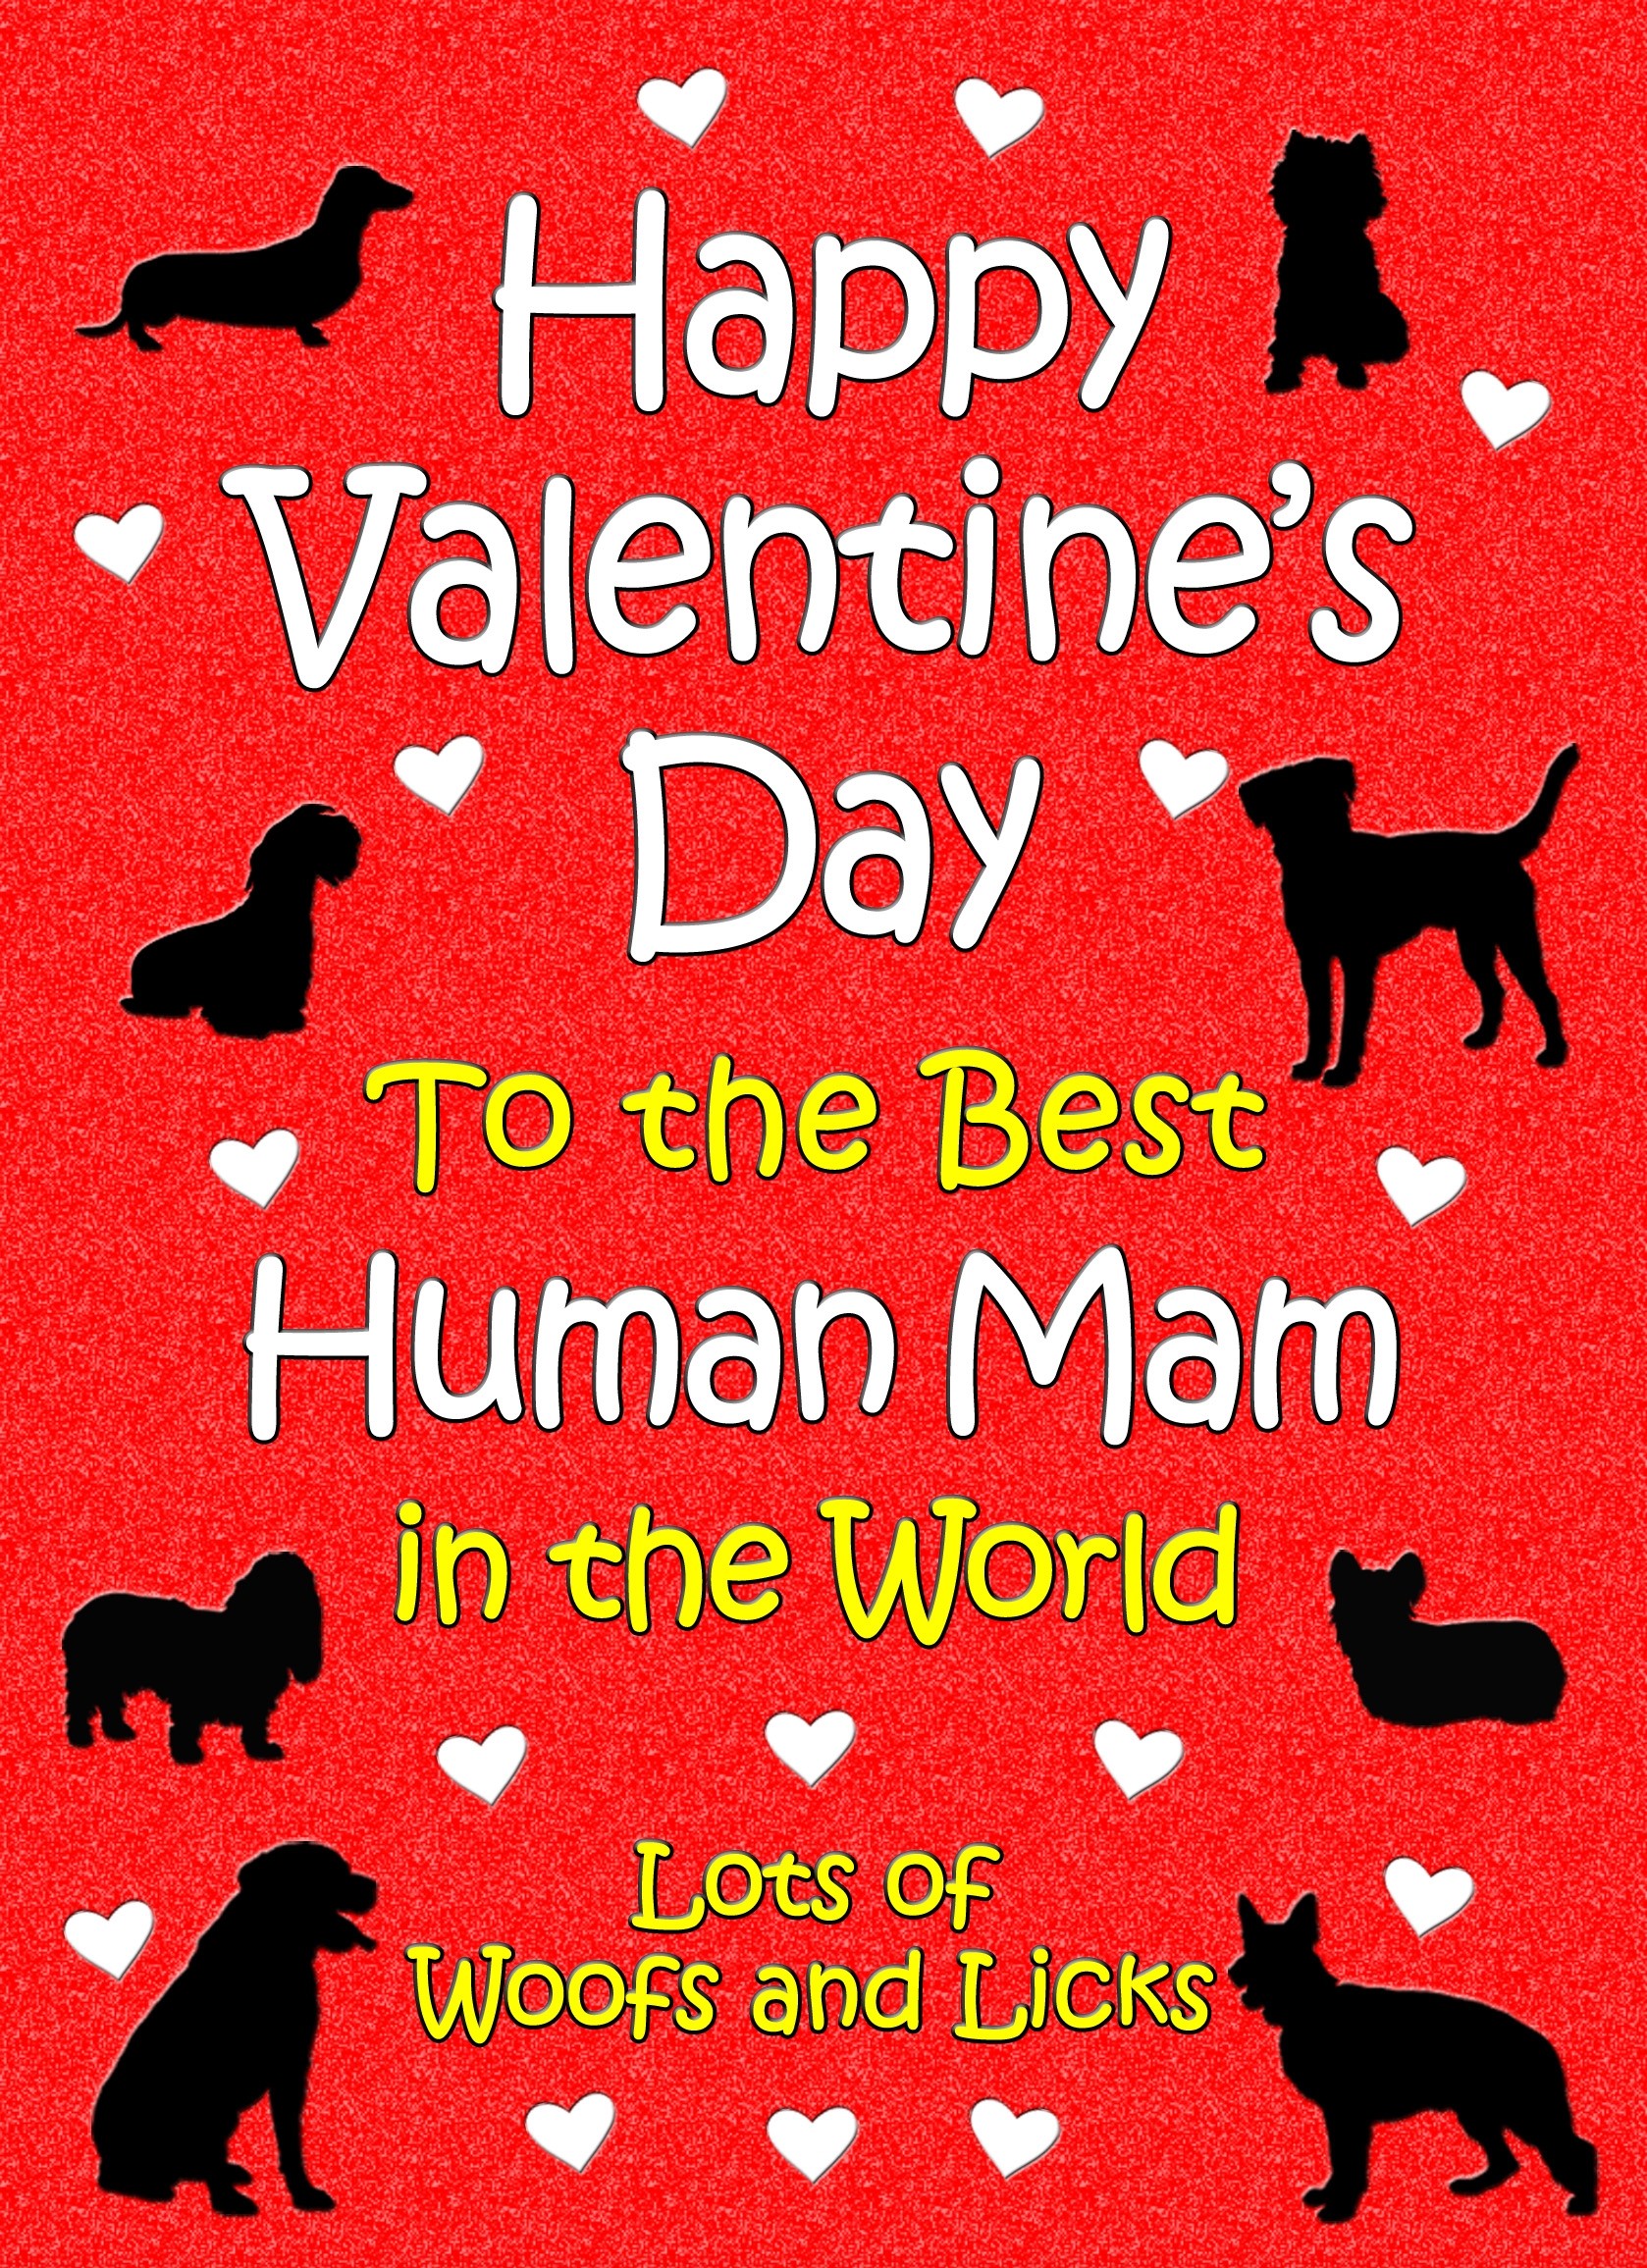 From The Dog Valentines Day Card (Human Mam)